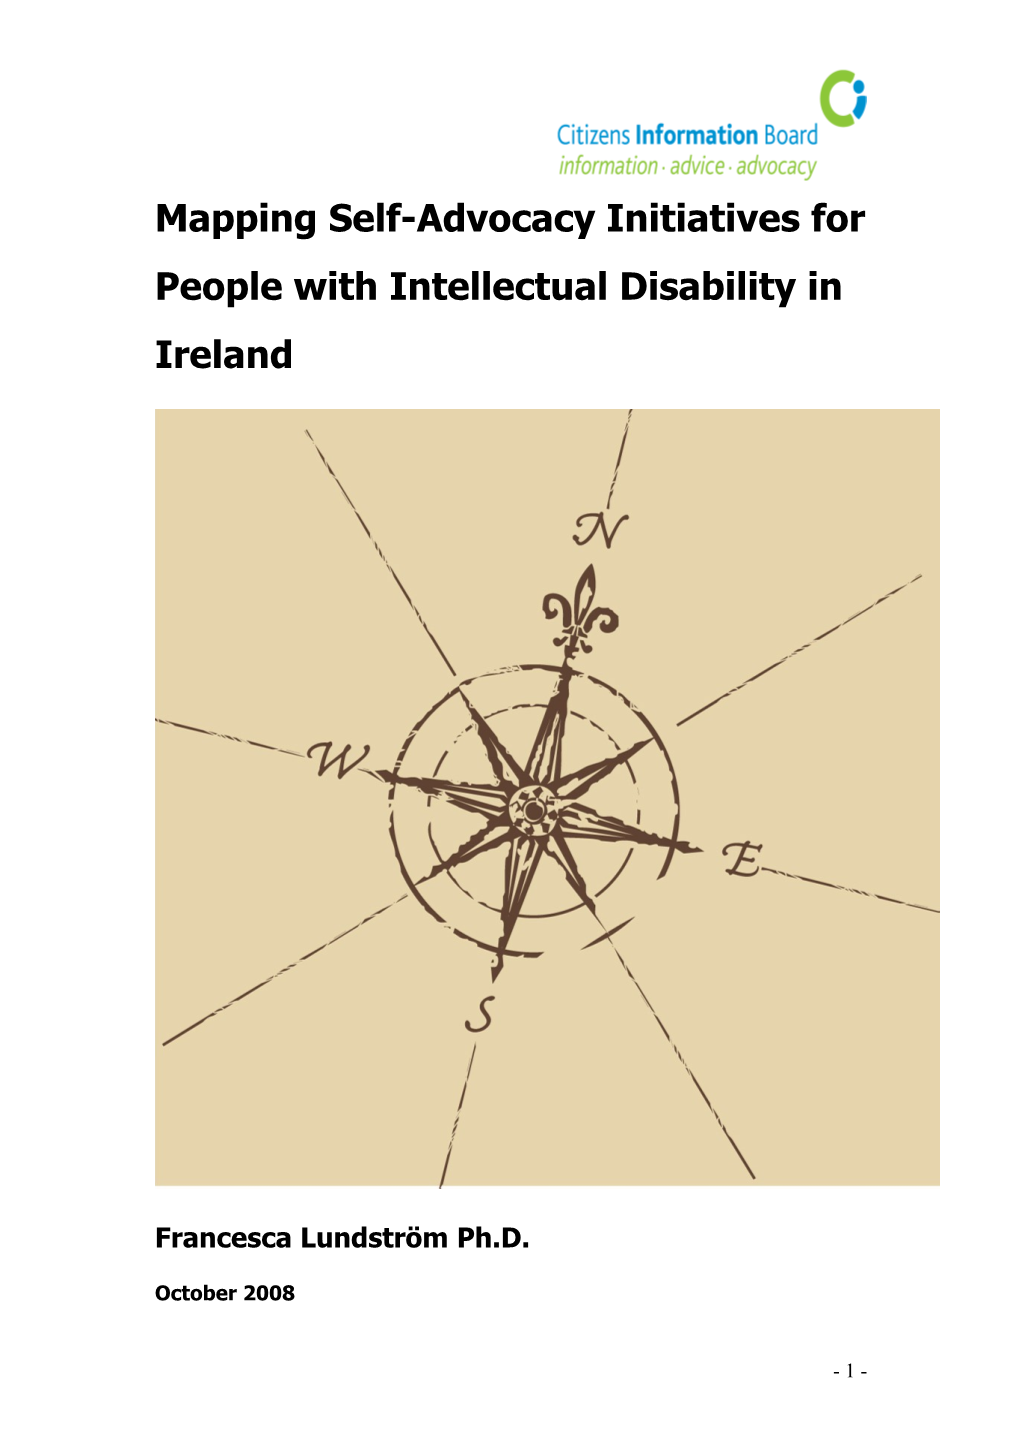 Mapping Self-Advocacy Initiatives for People with Intellectual Disability in Ireland